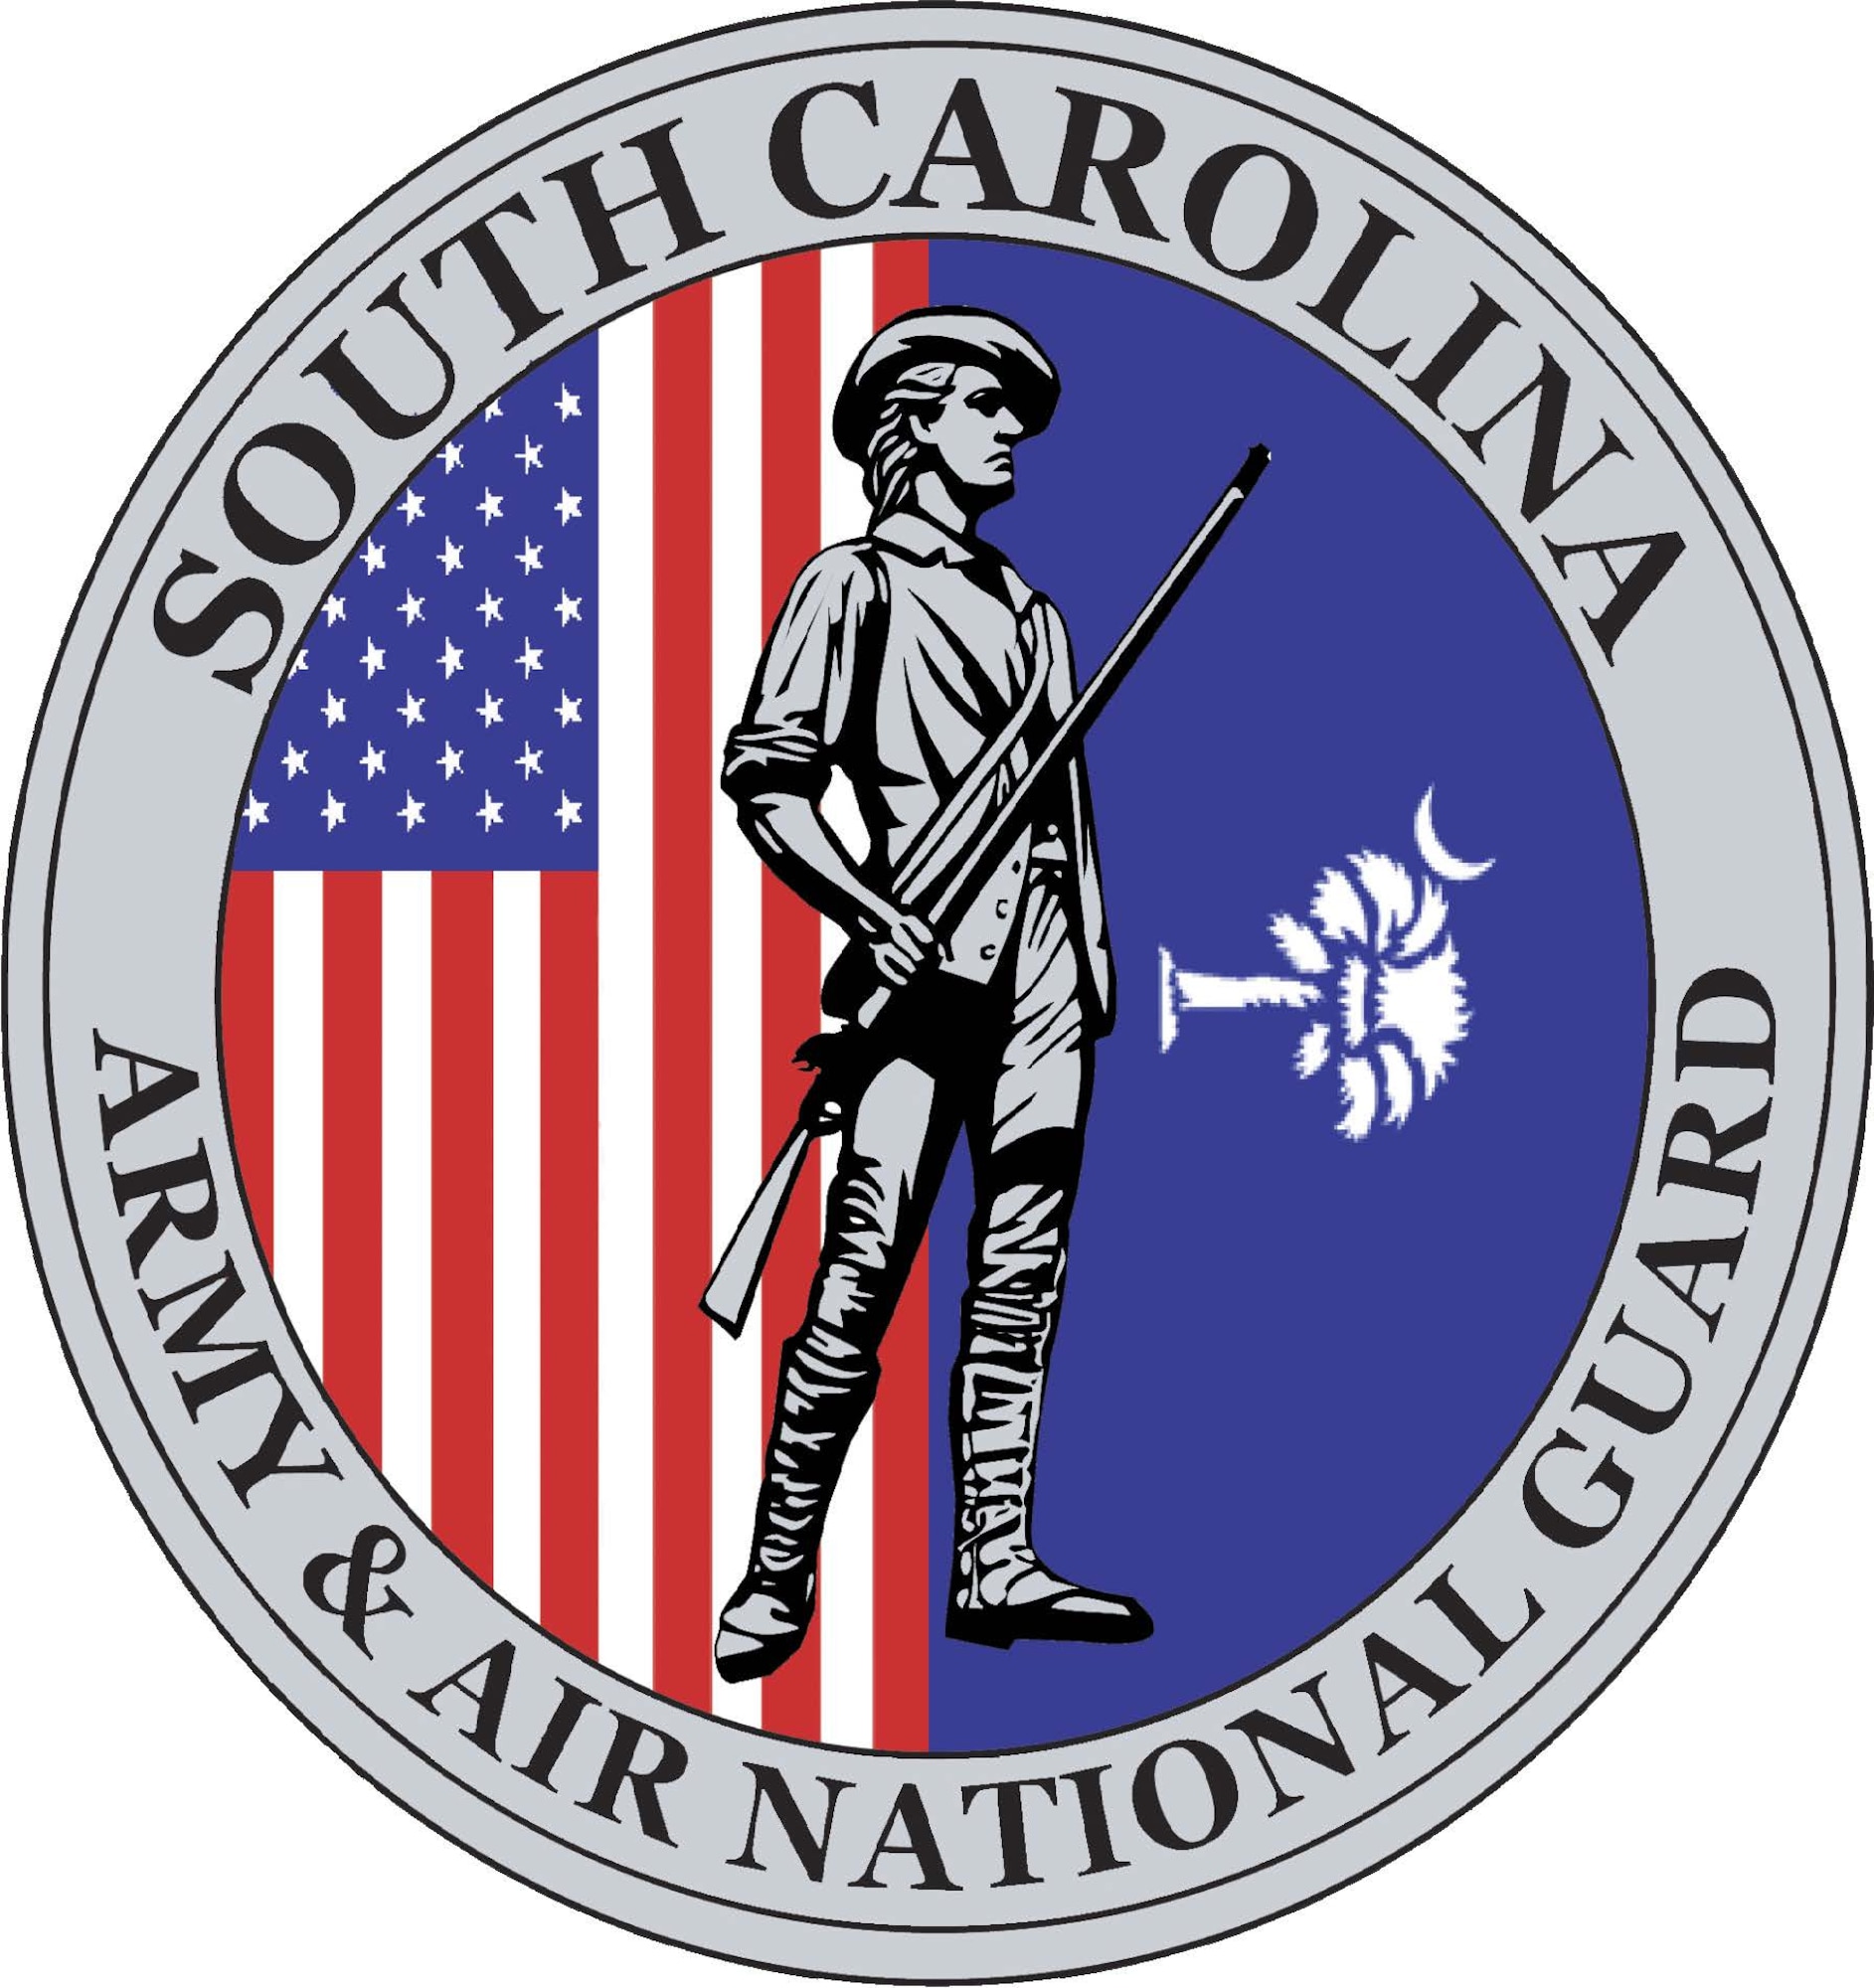 The South Carolina National Guard has announced Air Force Chief Master Sgt. Camille R. W. Caldwell as the next state command senior enlisted leader for the South Carolina National Guard. In this role, she will be the advisor to the adjutant general for South Carolina, and other key leaders on matters of health and welfare of the Soldiers and Airmen assigned to the South Carolina Army and Air National Guard. (SC National Guard graphic)